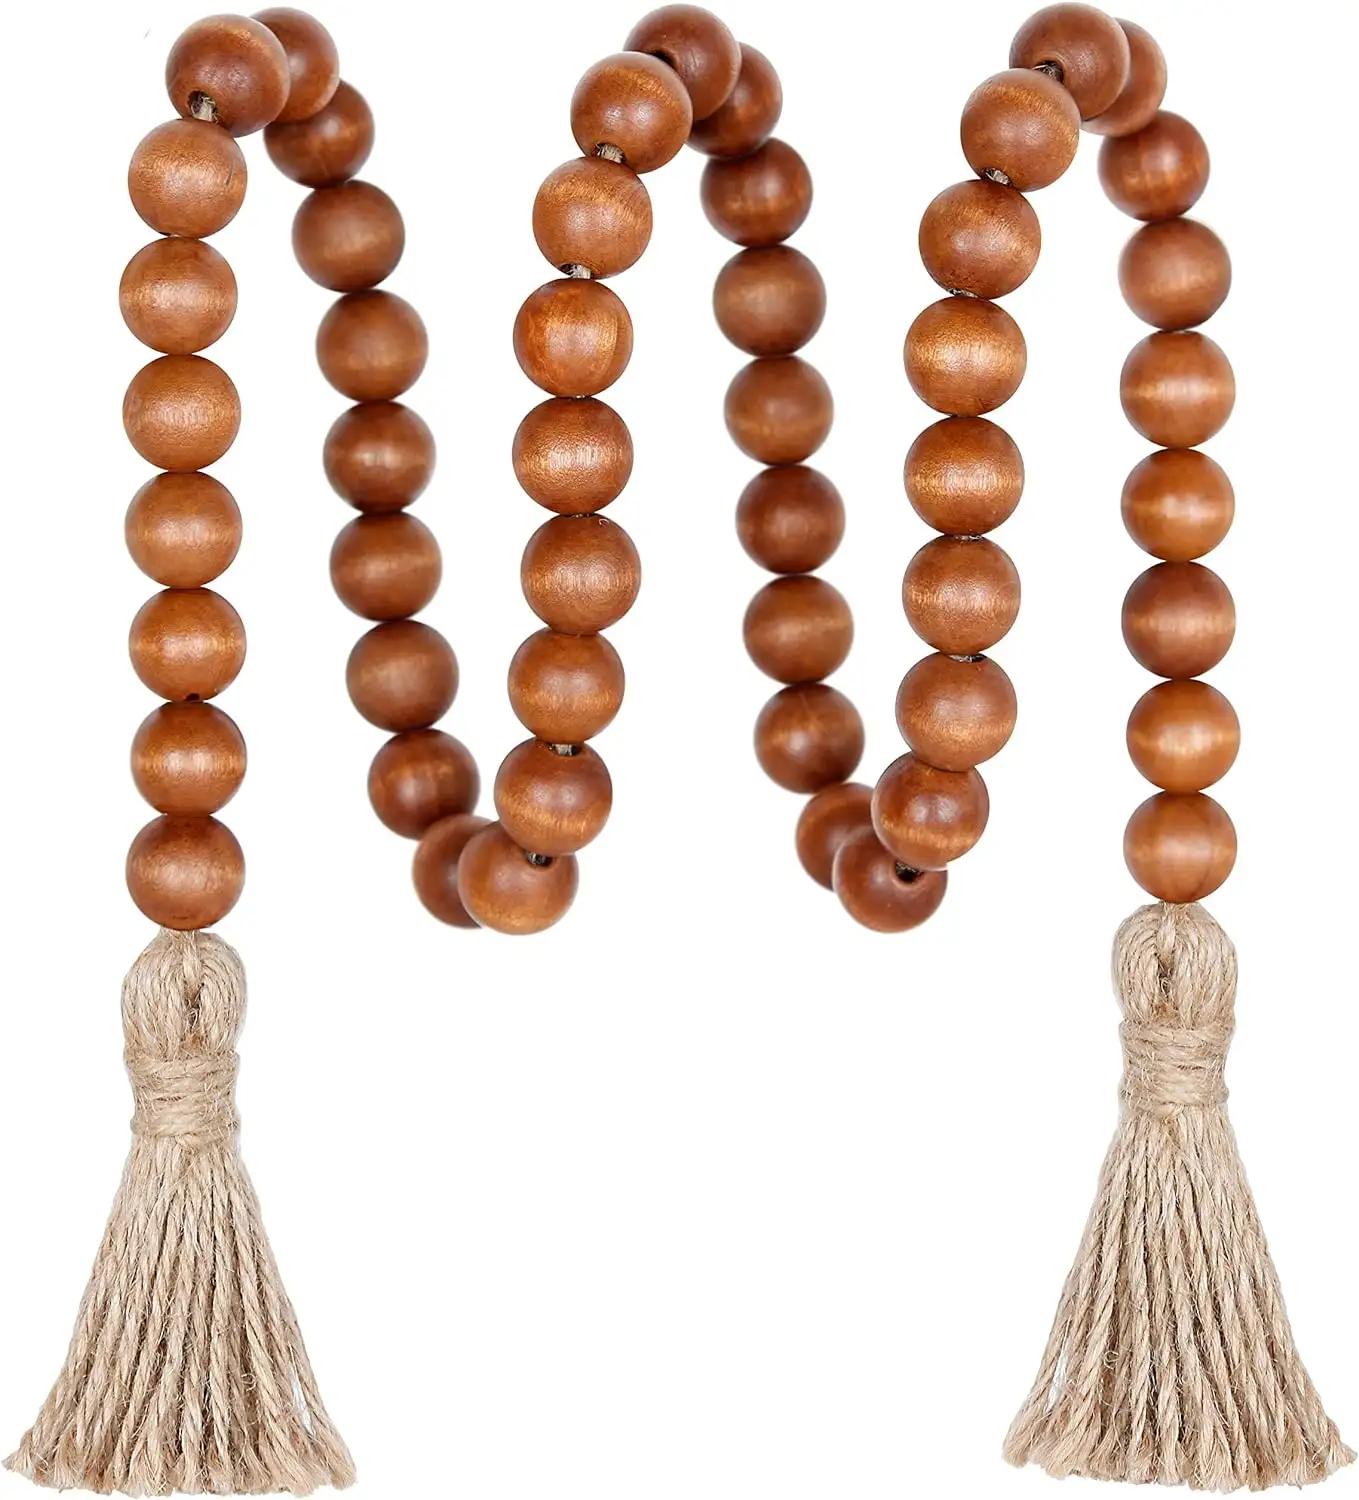 39in Wood Bead Garland Farmhouse Style with Tassels Versatile Prayer Beads for Boho Chic Wall Hanging Home Decor Wood Crafts